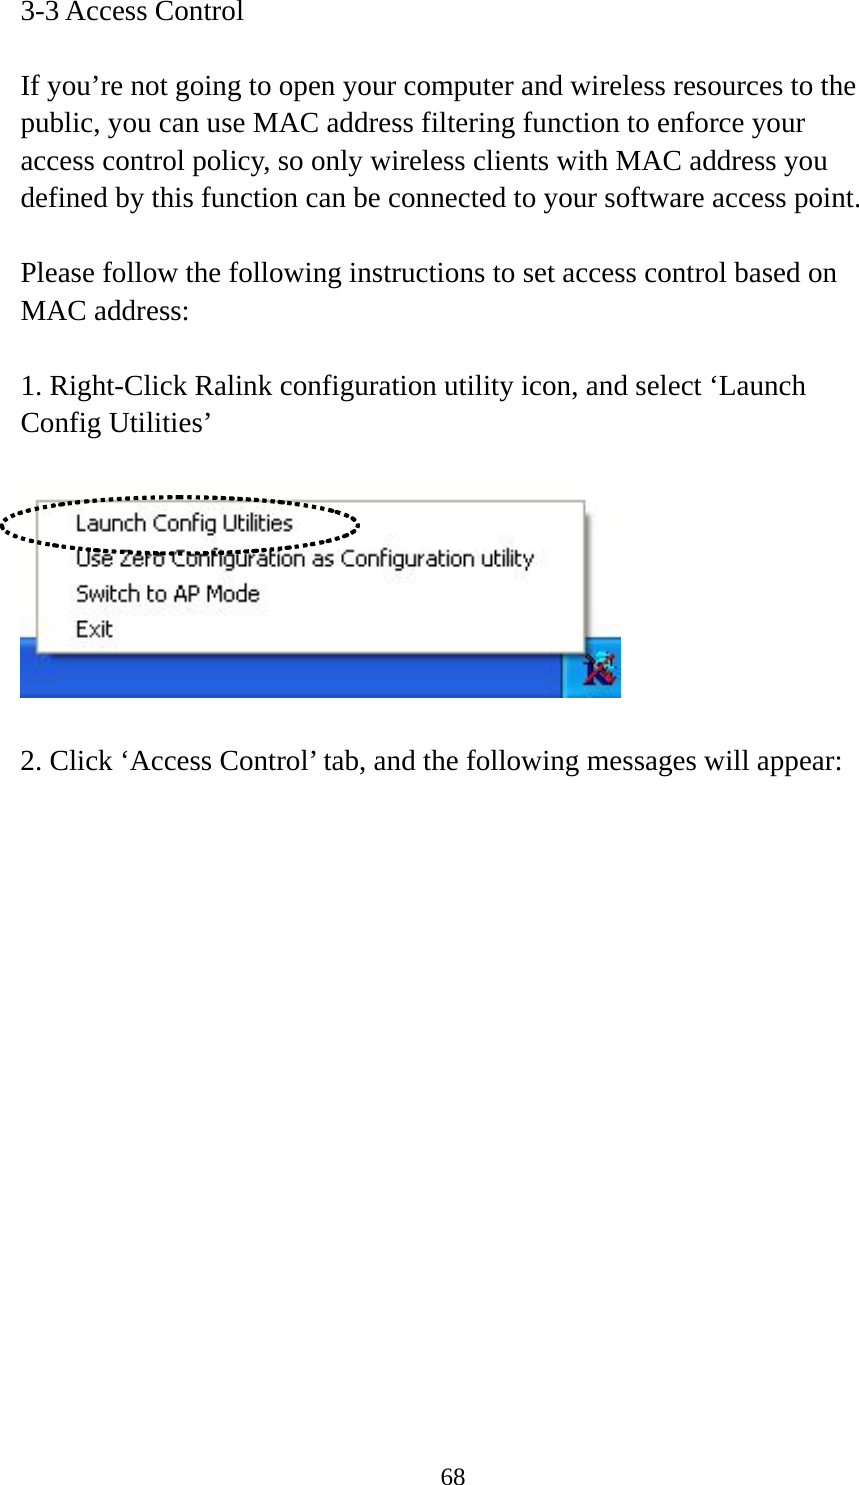  683-3 Access Control  If you’re not going to open your computer and wireless resources to the public, you can use MAC address filtering function to enforce your access control policy, so only wireless clients with MAC address you defined by this function can be connected to your software access point.  Please follow the following instructions to set access control based on MAC address:  1. Right-Click Ralink configuration utility icon, and select ‘Launch Config Utilities’    2. Click ‘Access Control’ tab, and the following messages will appear:  